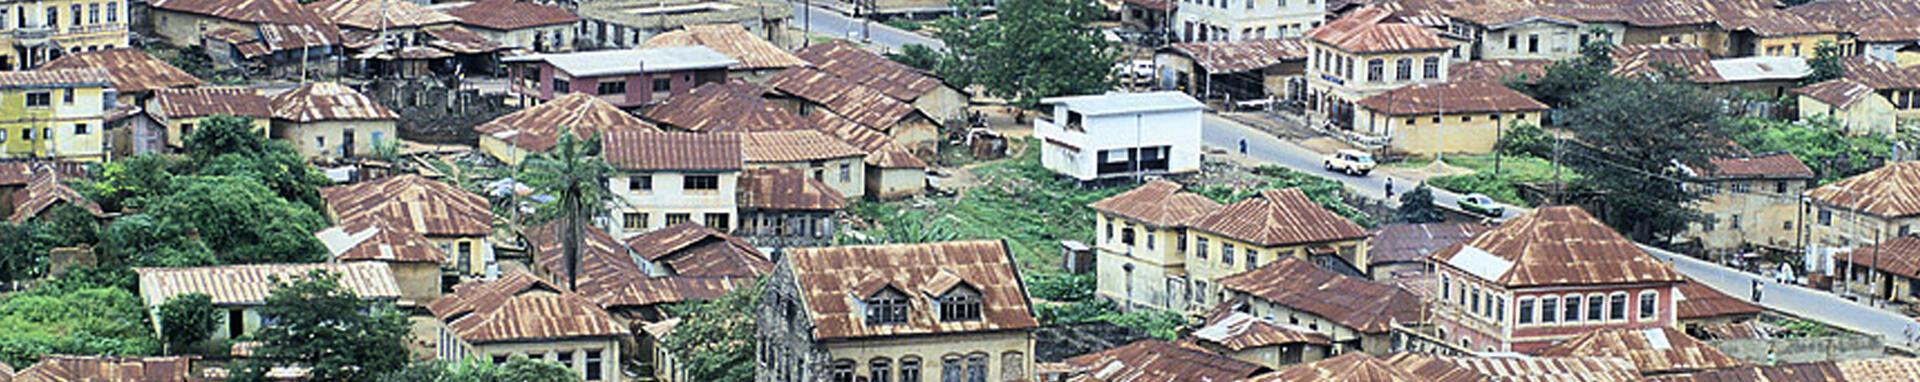 World Bank Photo Collection Areal view, Nigeria. Photo: World Bank